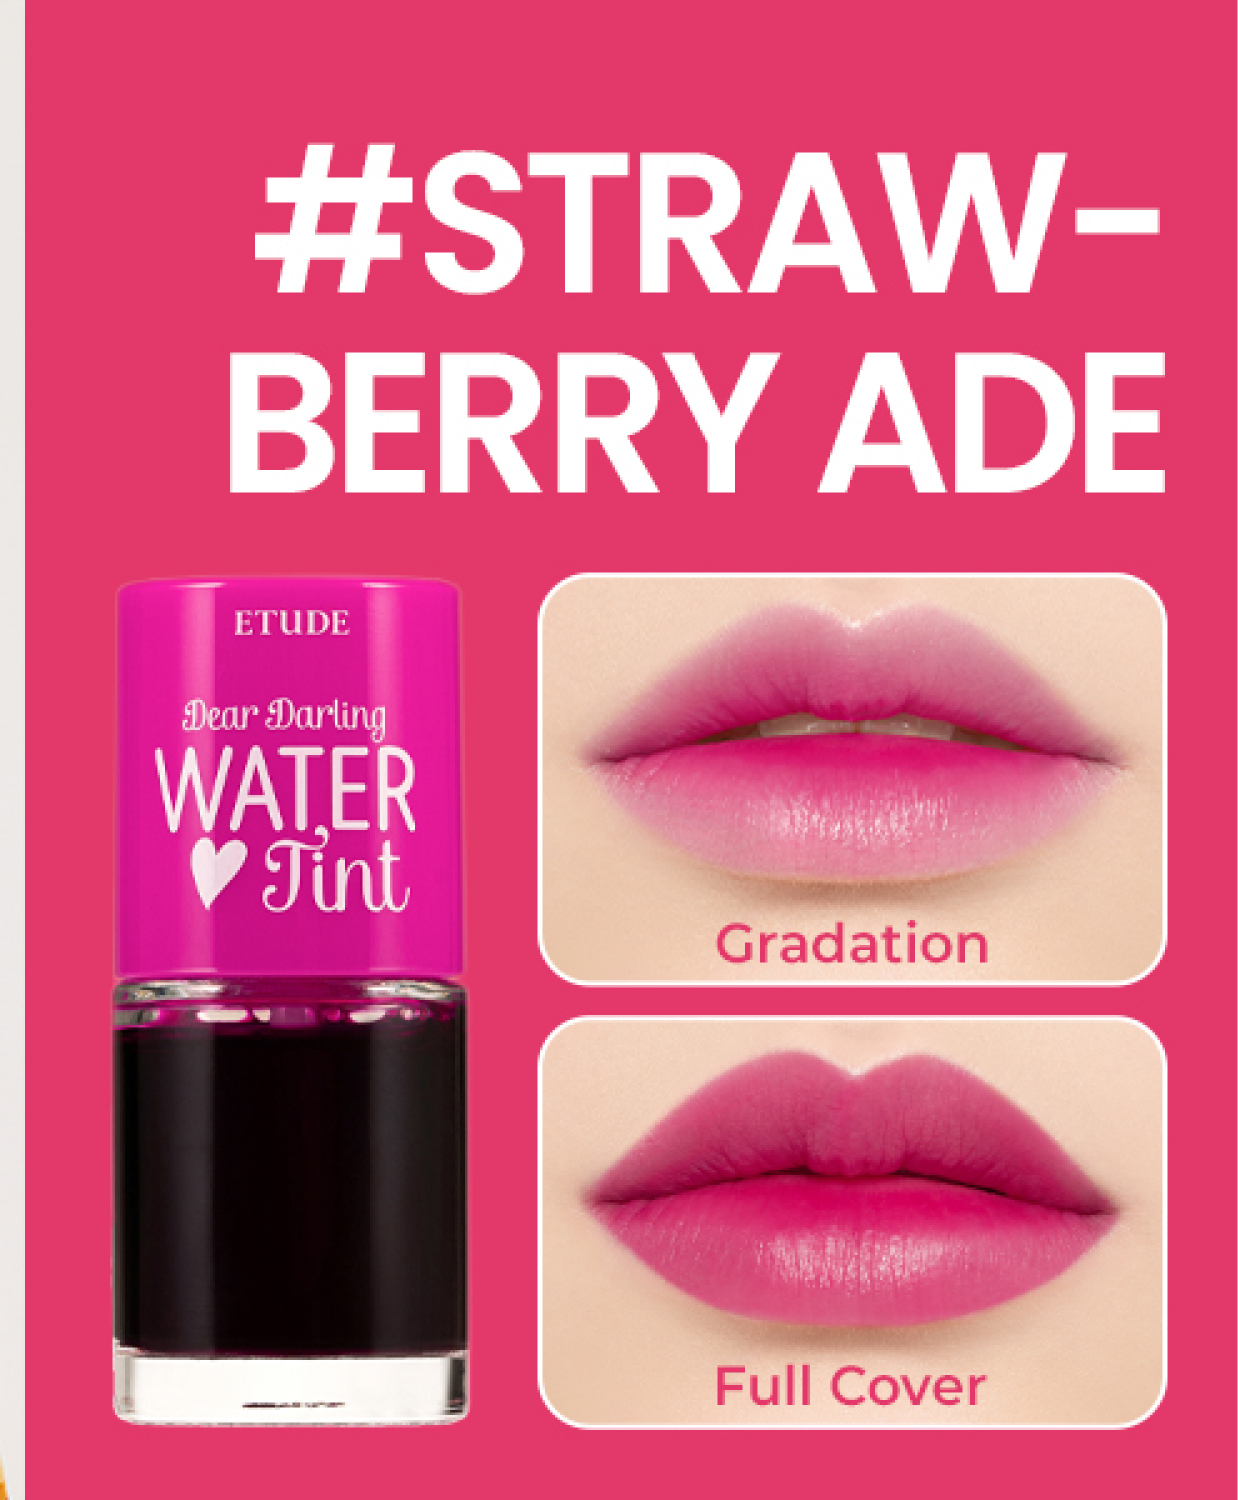 Dear darling water tint- Strawberry-ade